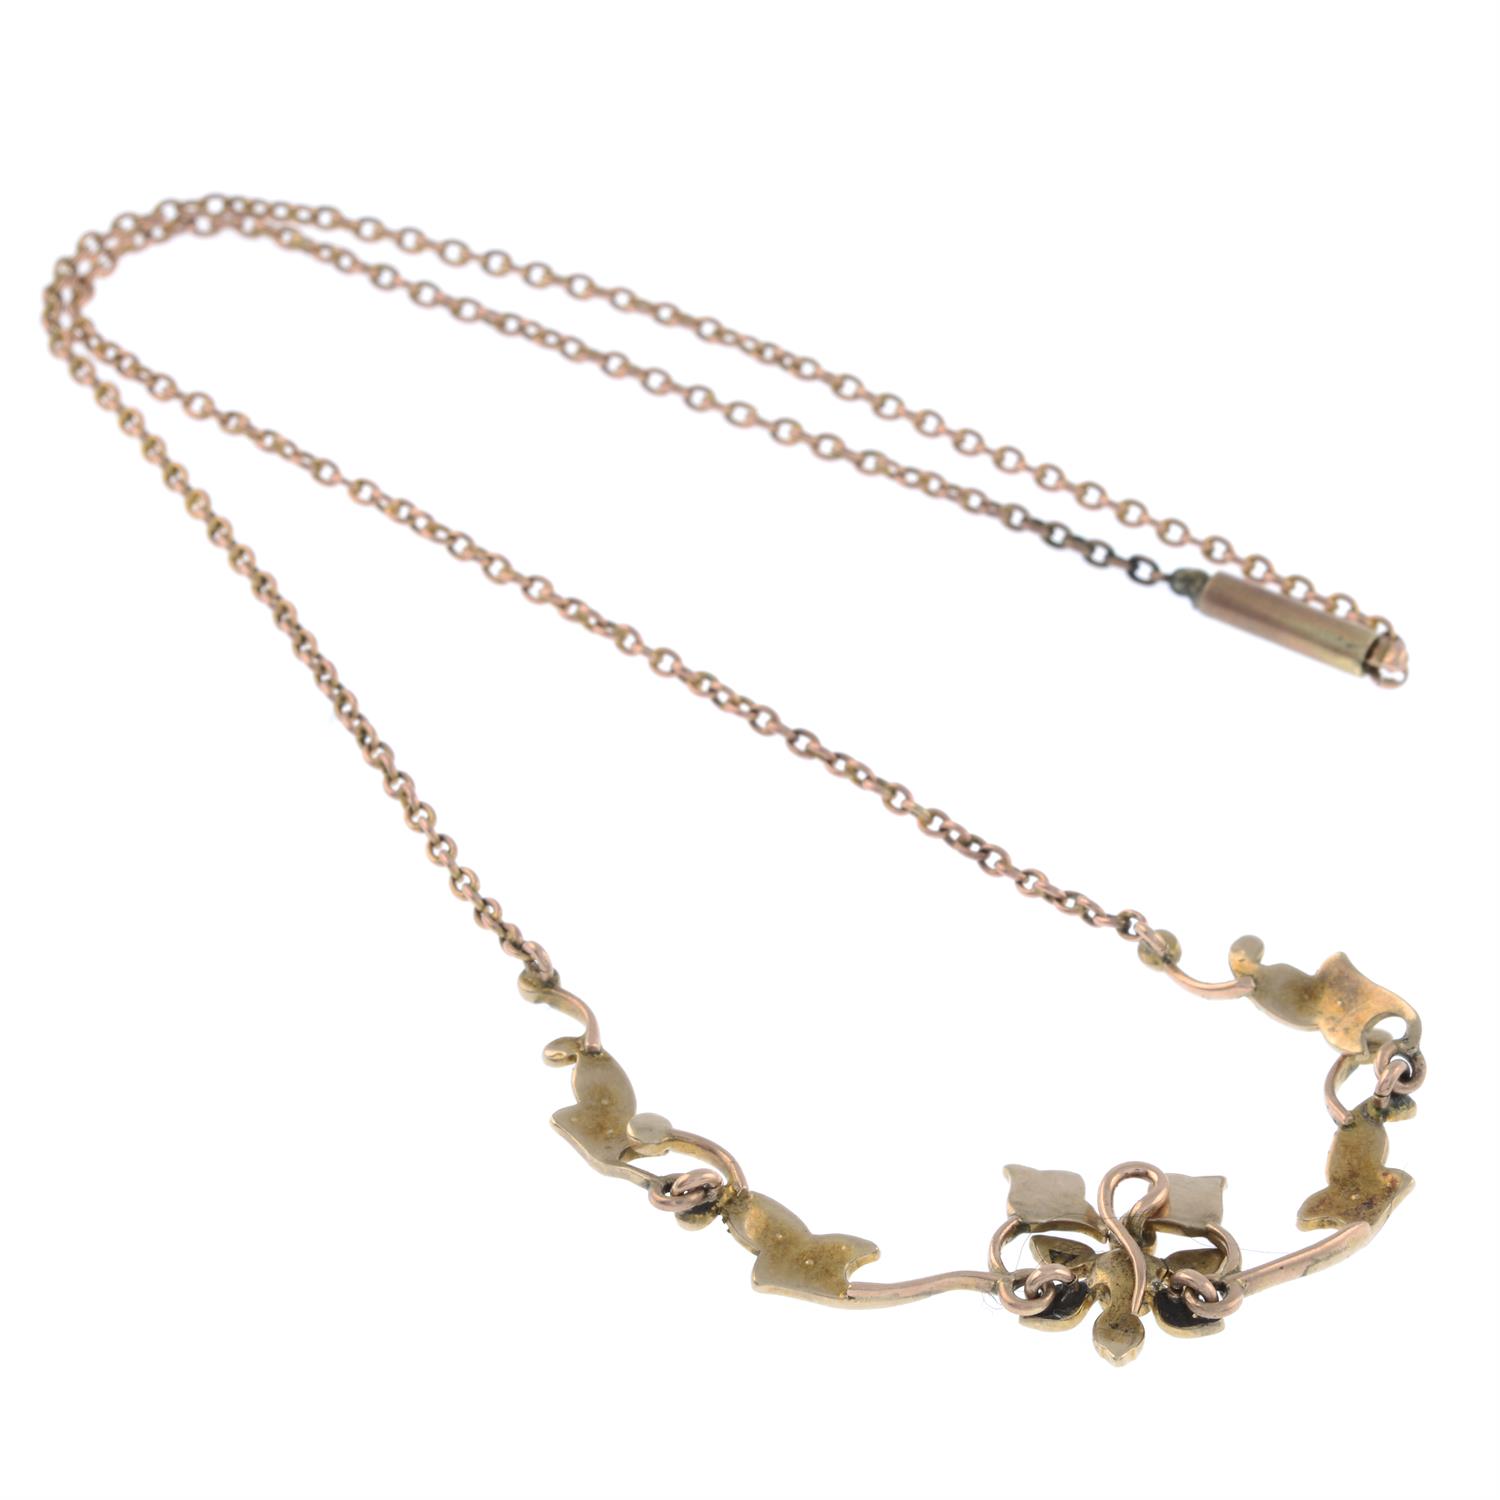 Victorian split pearl floral necklace - Image 2 of 2